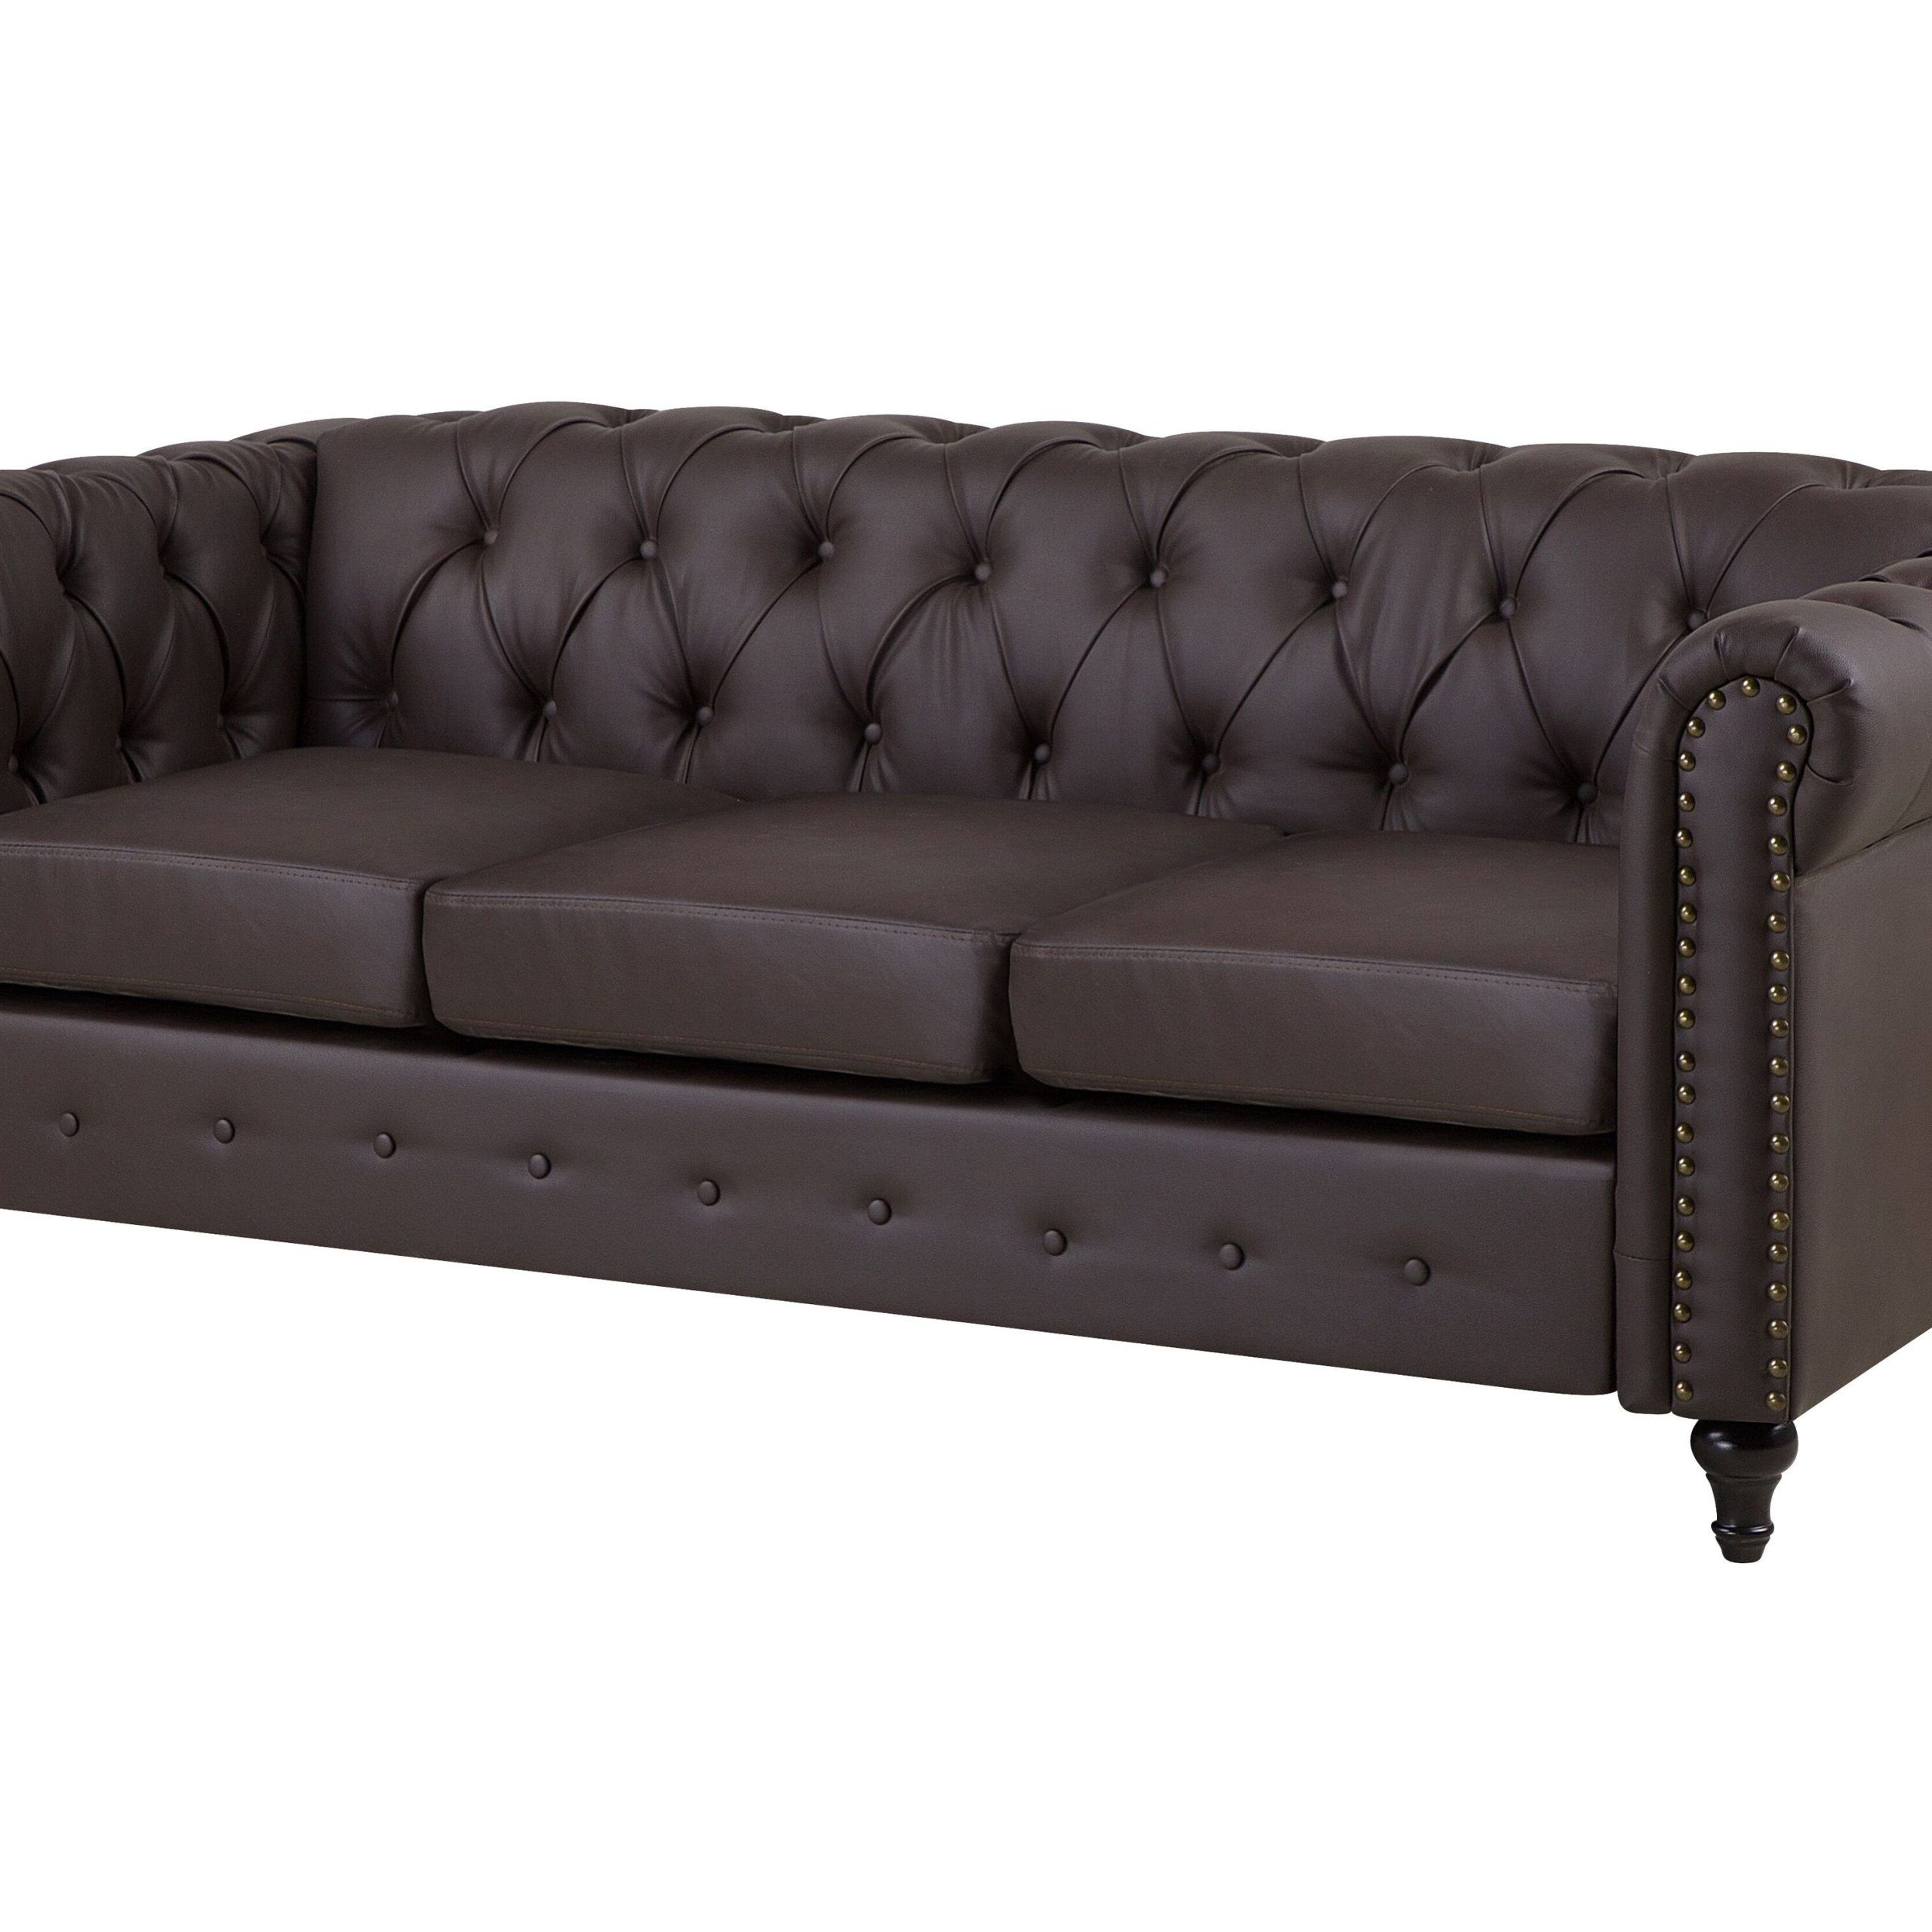 3 Seater Faux Leather Sofa Brown Chesterfield | Beliani.co.uk With Regard To Traditional 3 Seater Faux Leather Sofas (Gallery 4 of 20)